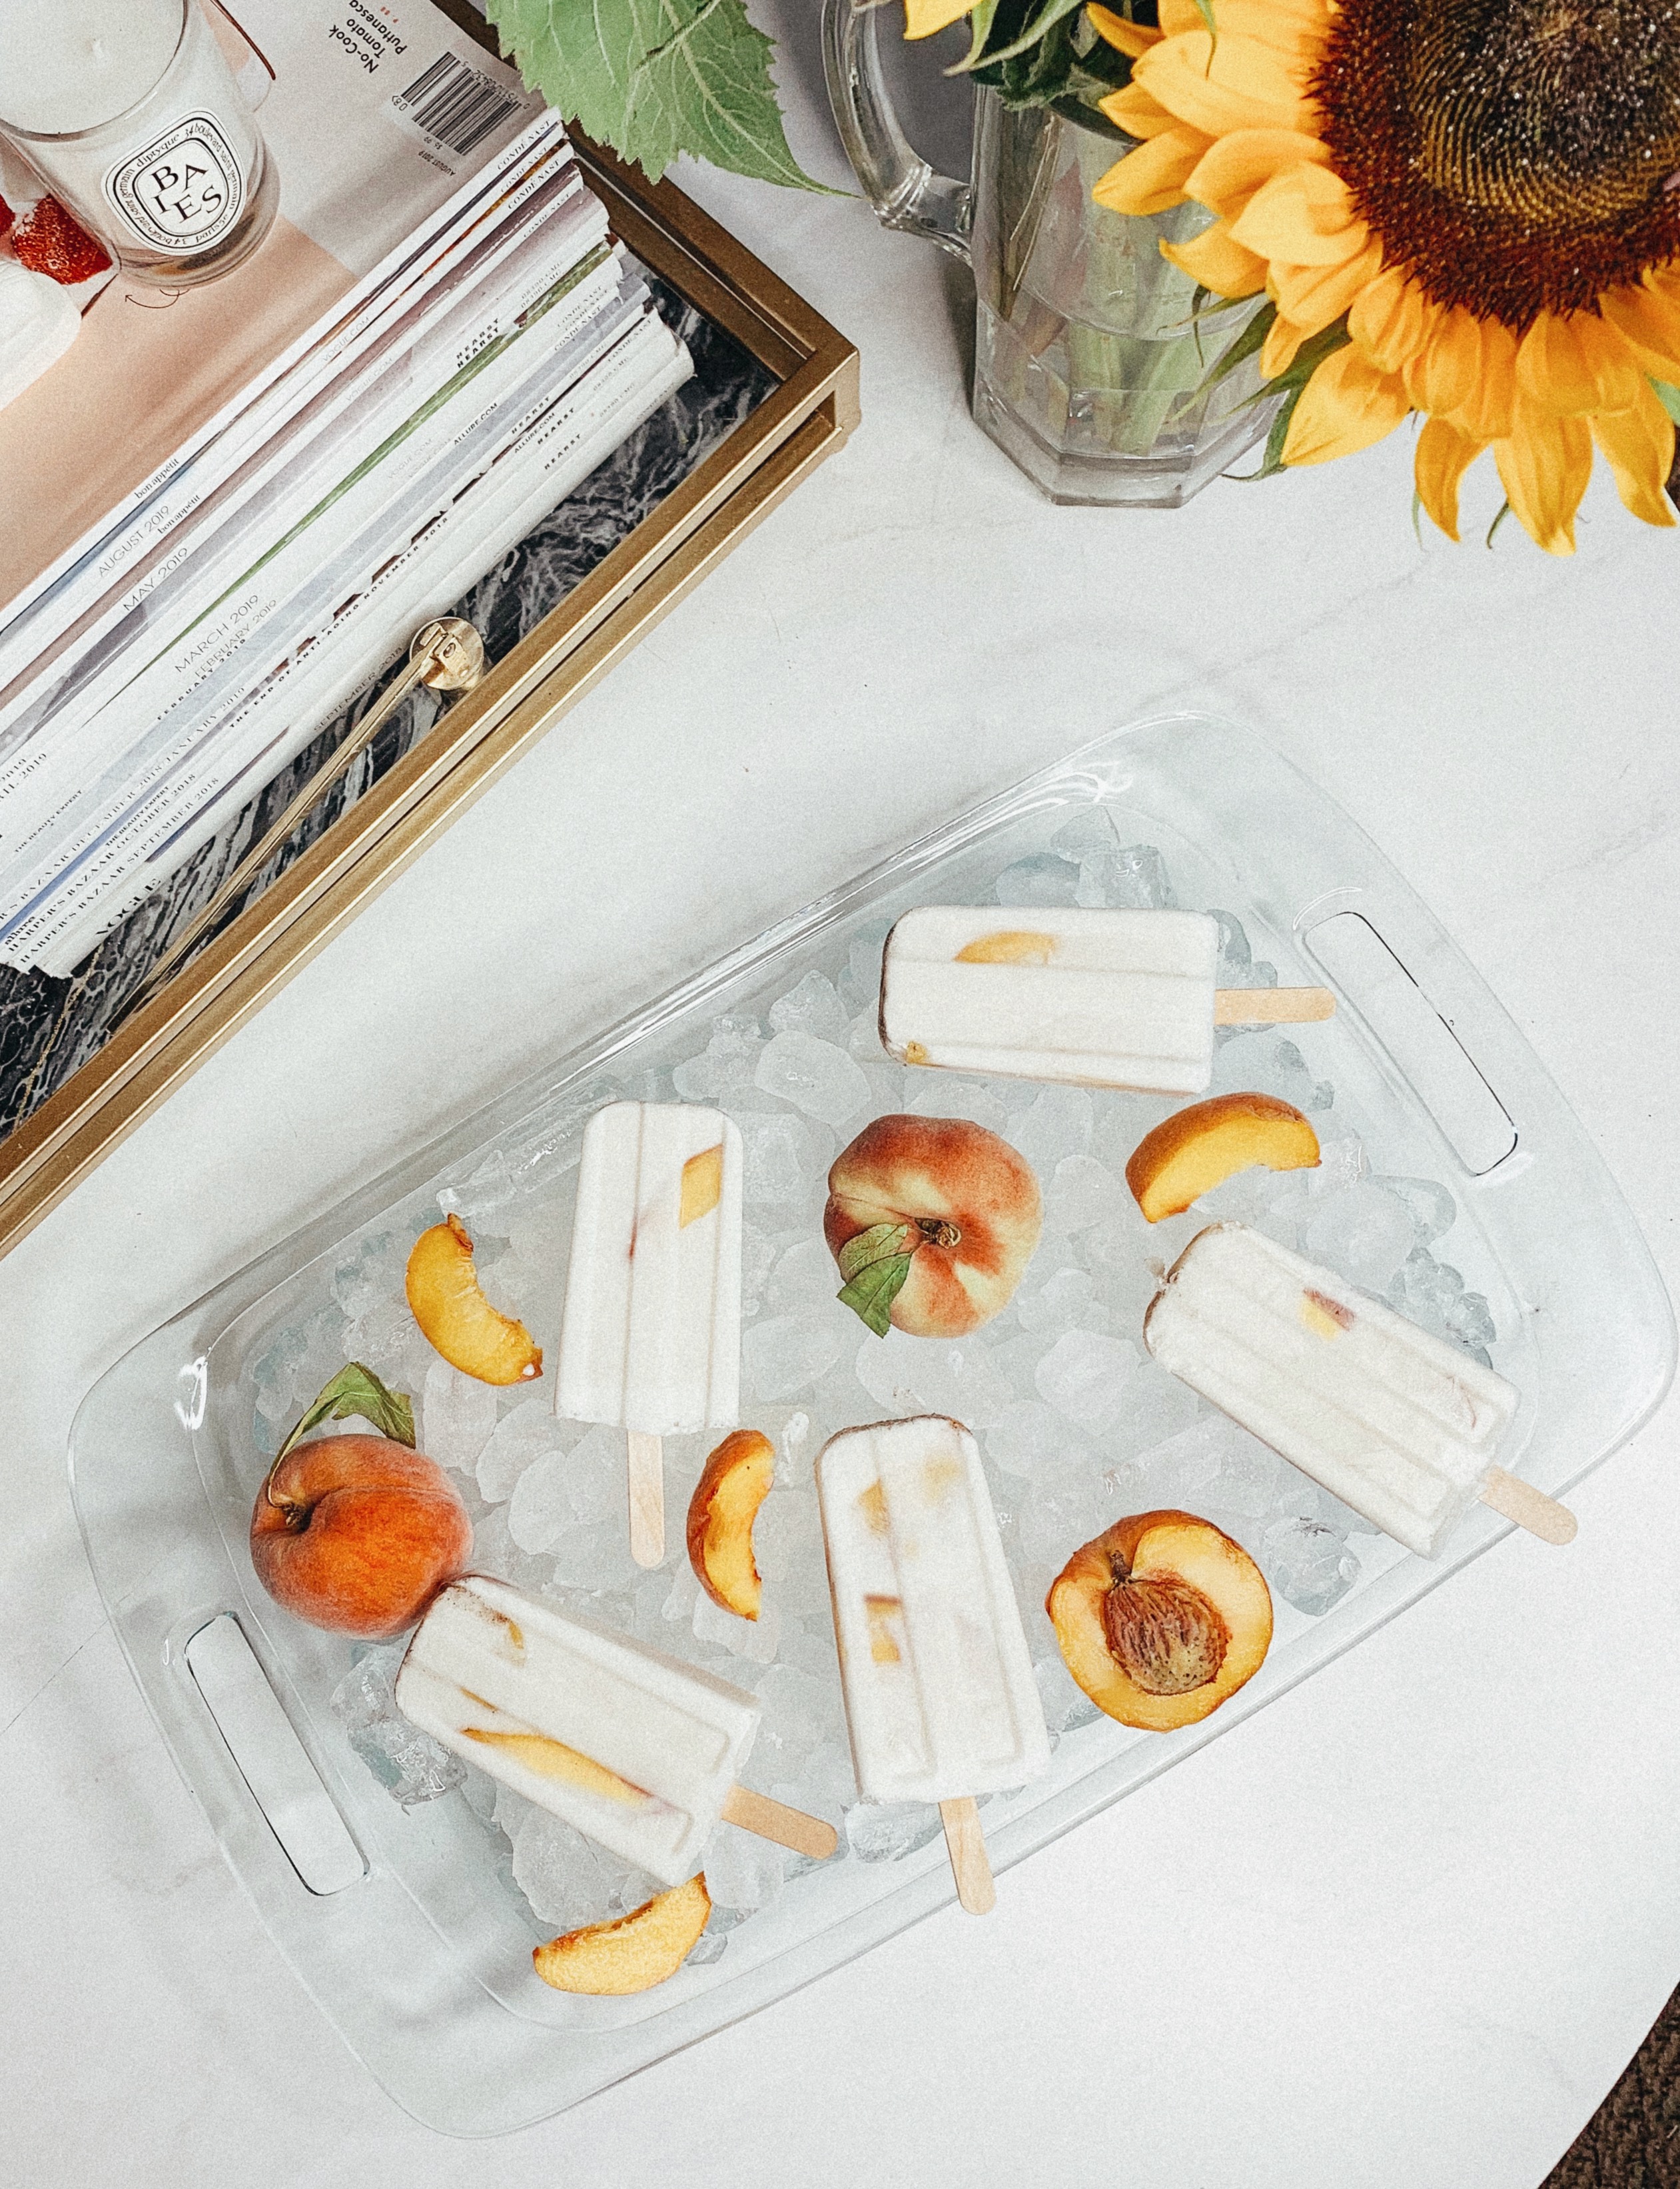 Be The Best Guest – Show Up With These Peach Coconut Ice Pops!